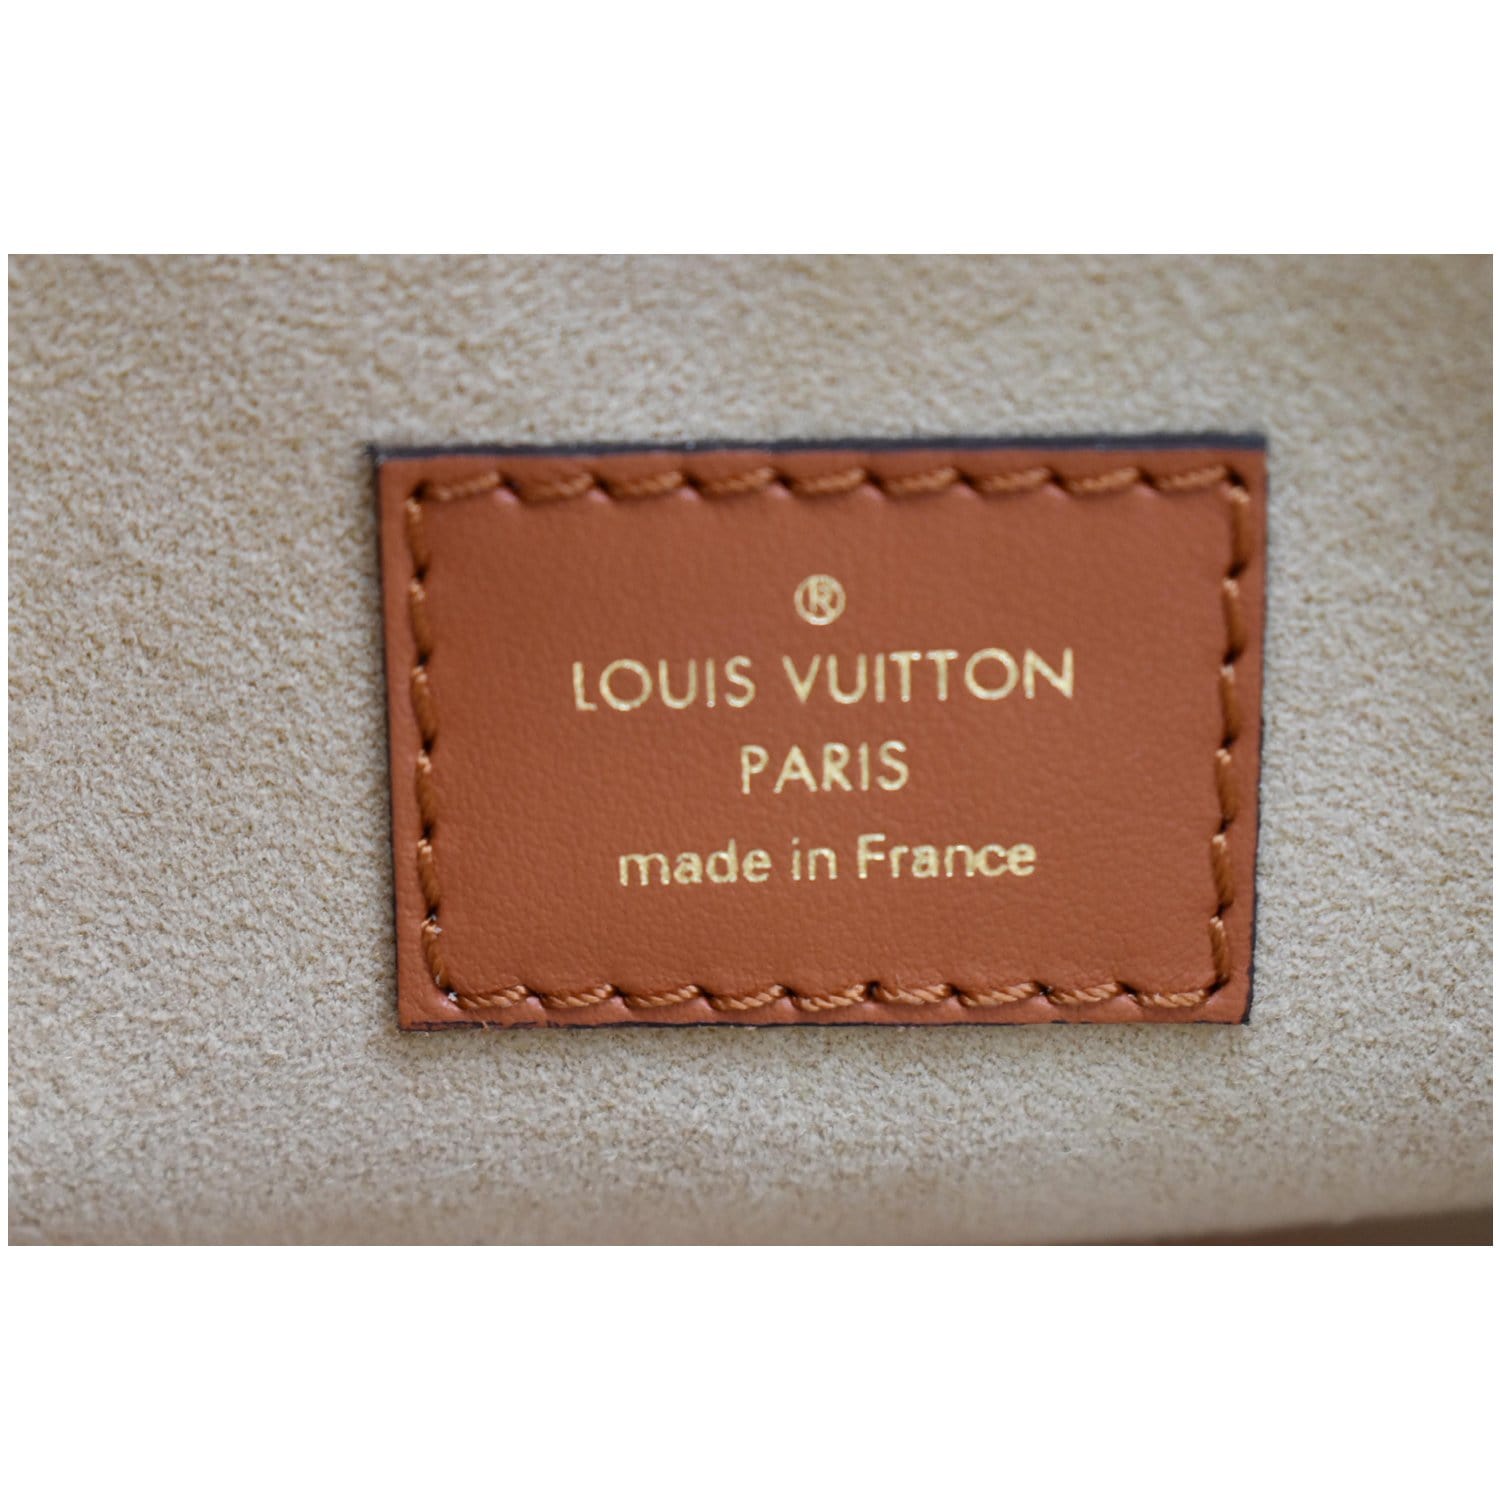 Louis Vuitton Tufted Monogram on My Side